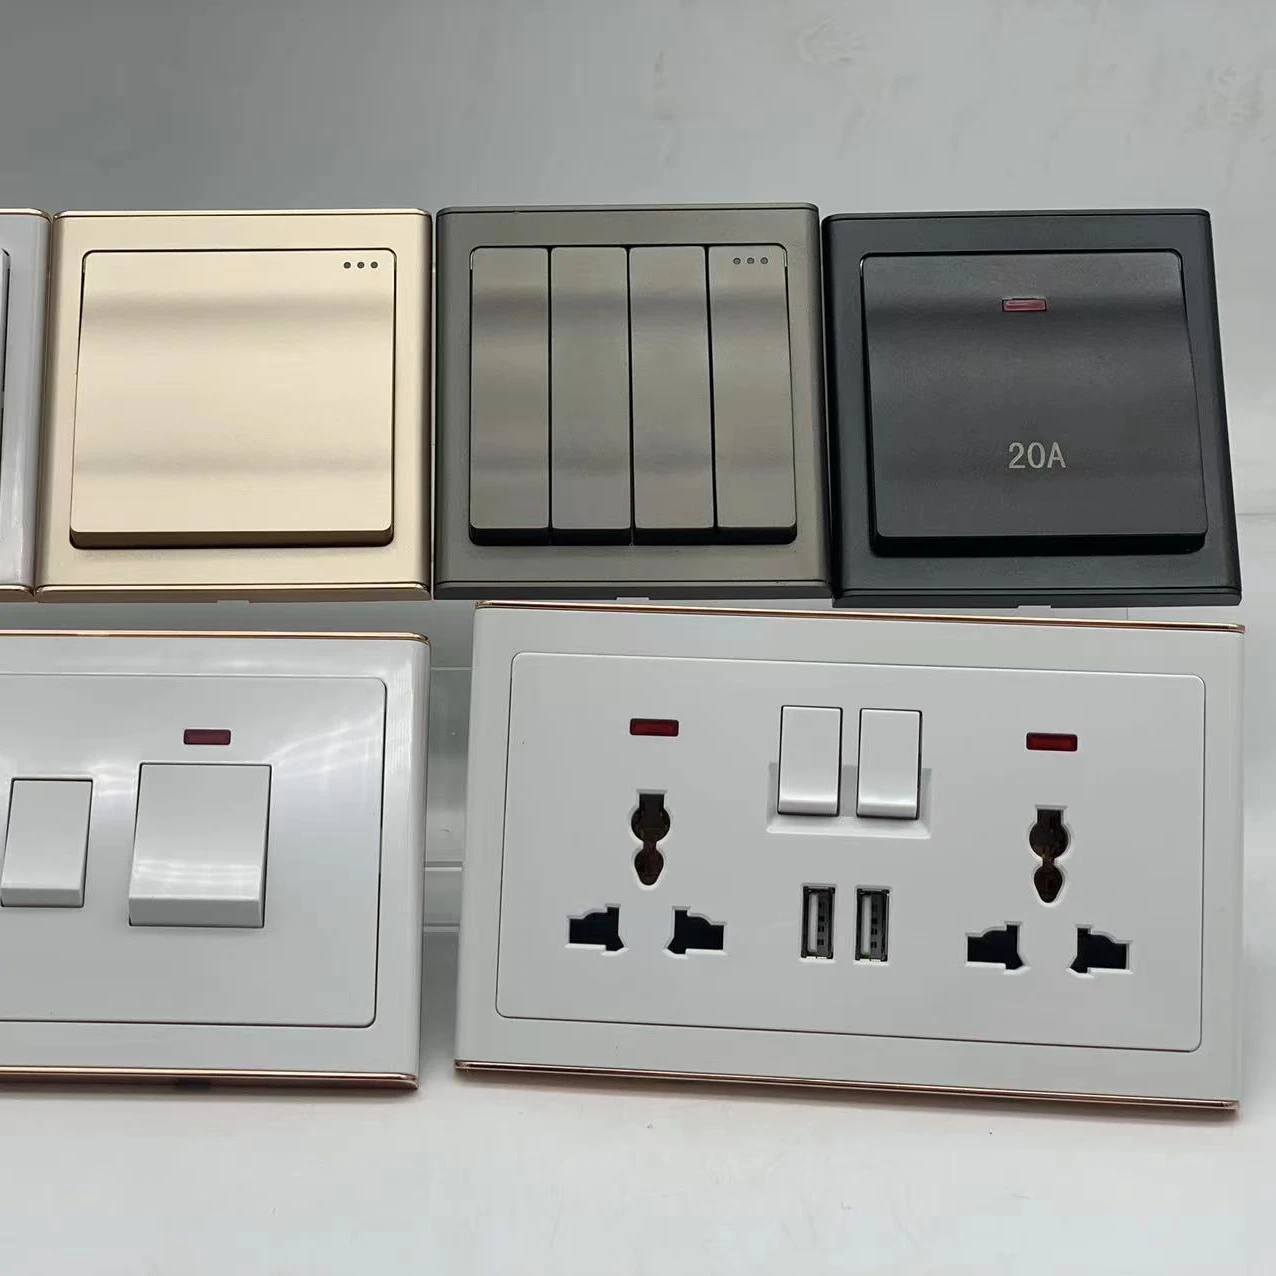 Wholesale PC and stainless black panel switch colors electrical BS standard 2 gang 16A sockets